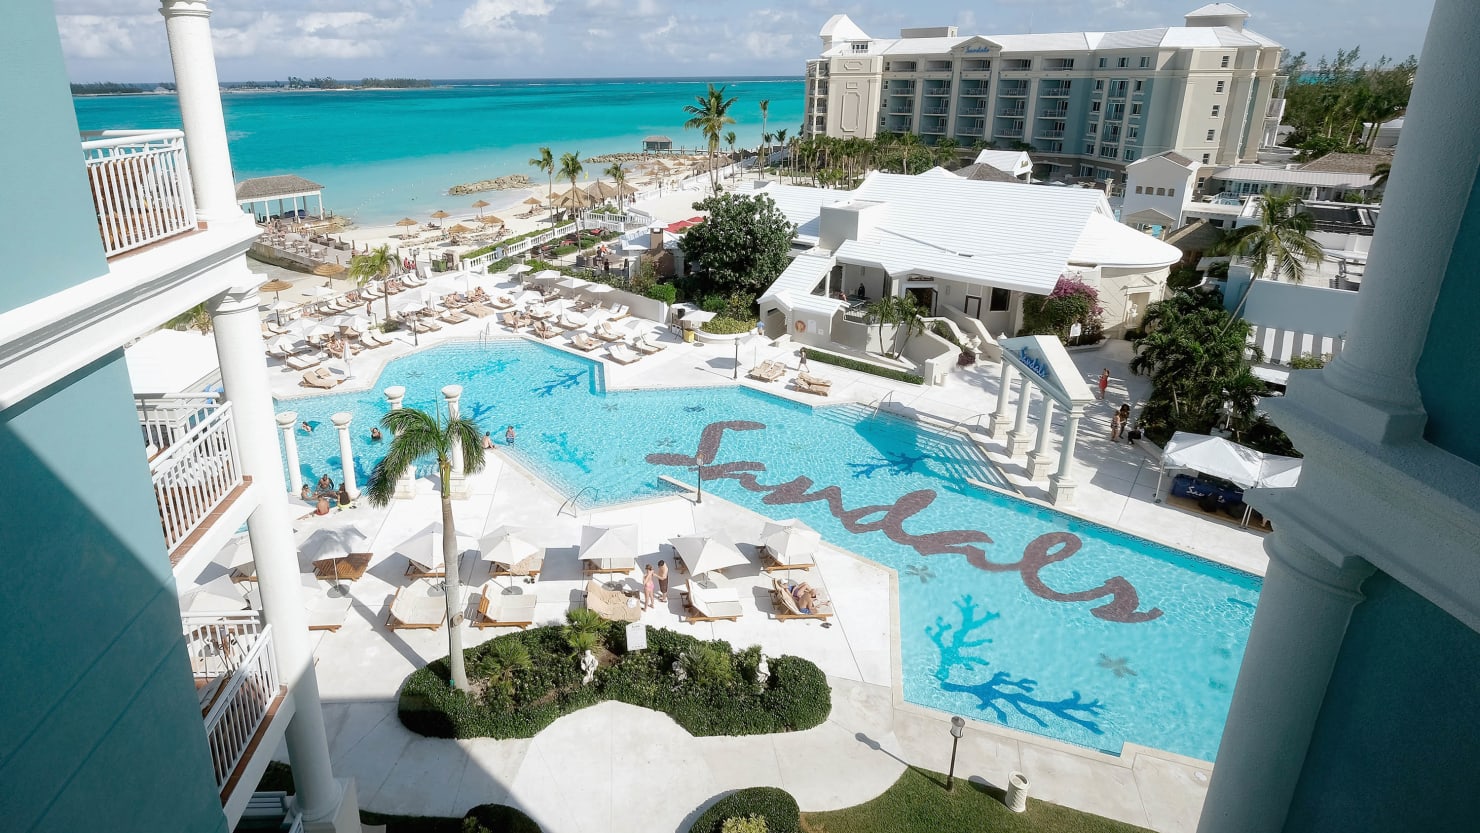 Sandals Resorts’ reopening of the Mid-Coronavirus pandemic begins difficult